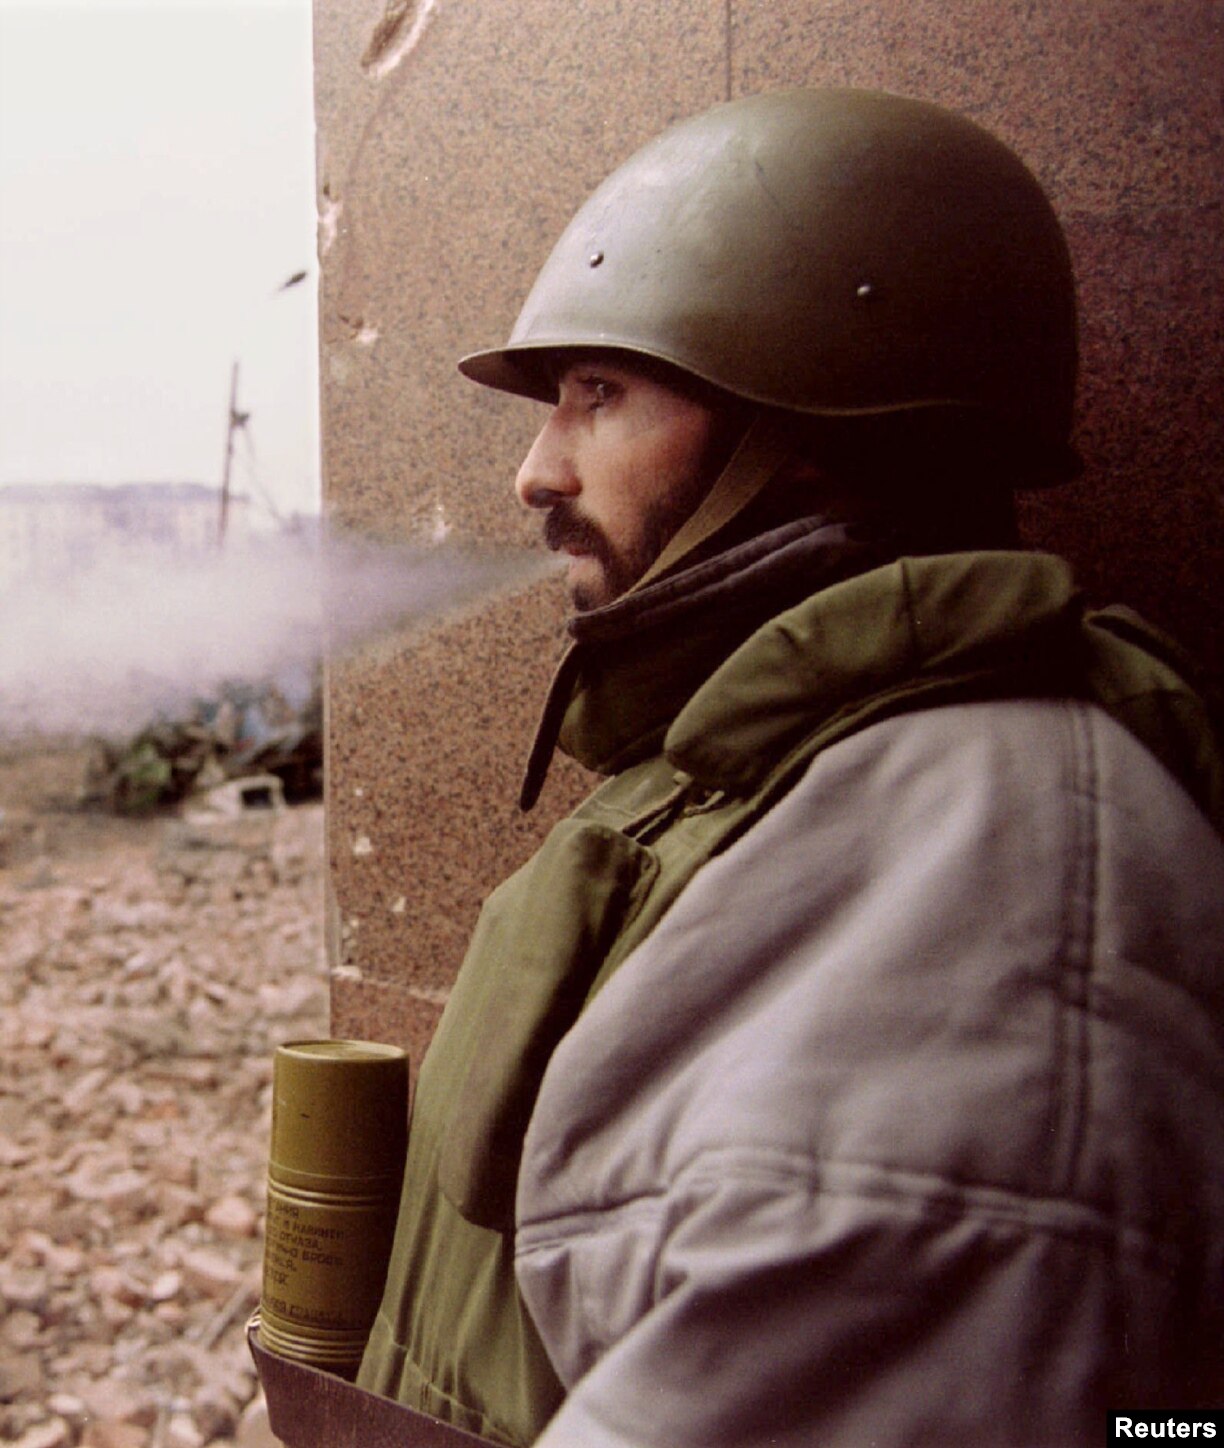 A rare photo shows a Chechen fighter armed with an RKG-3 grenade in the center of Grozny during the first Chechen war in 1995.